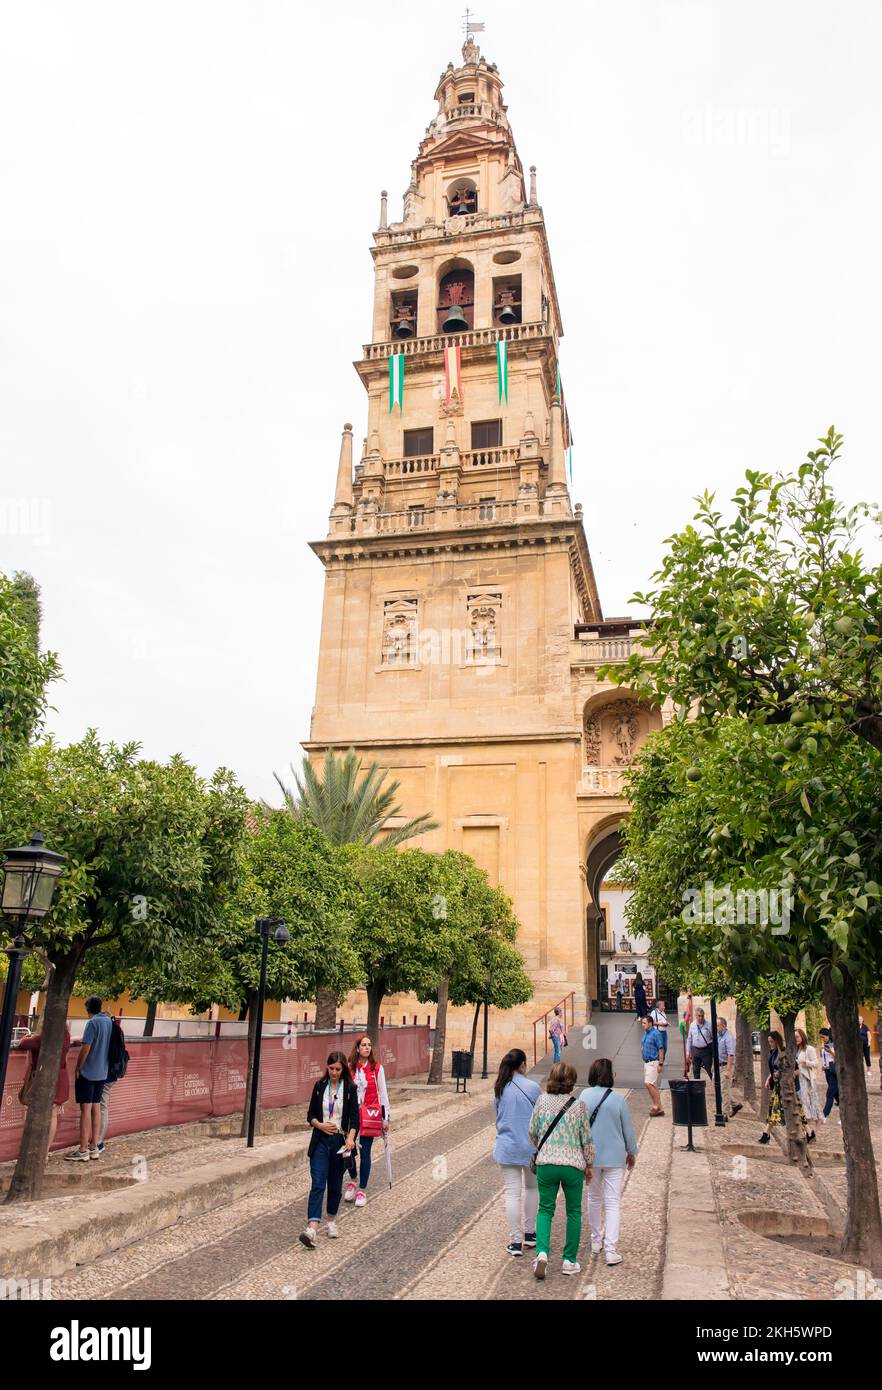 Bell Tower of the Mosque-Cathedral of Cordoba, Andalusia, Spain Stock Photo